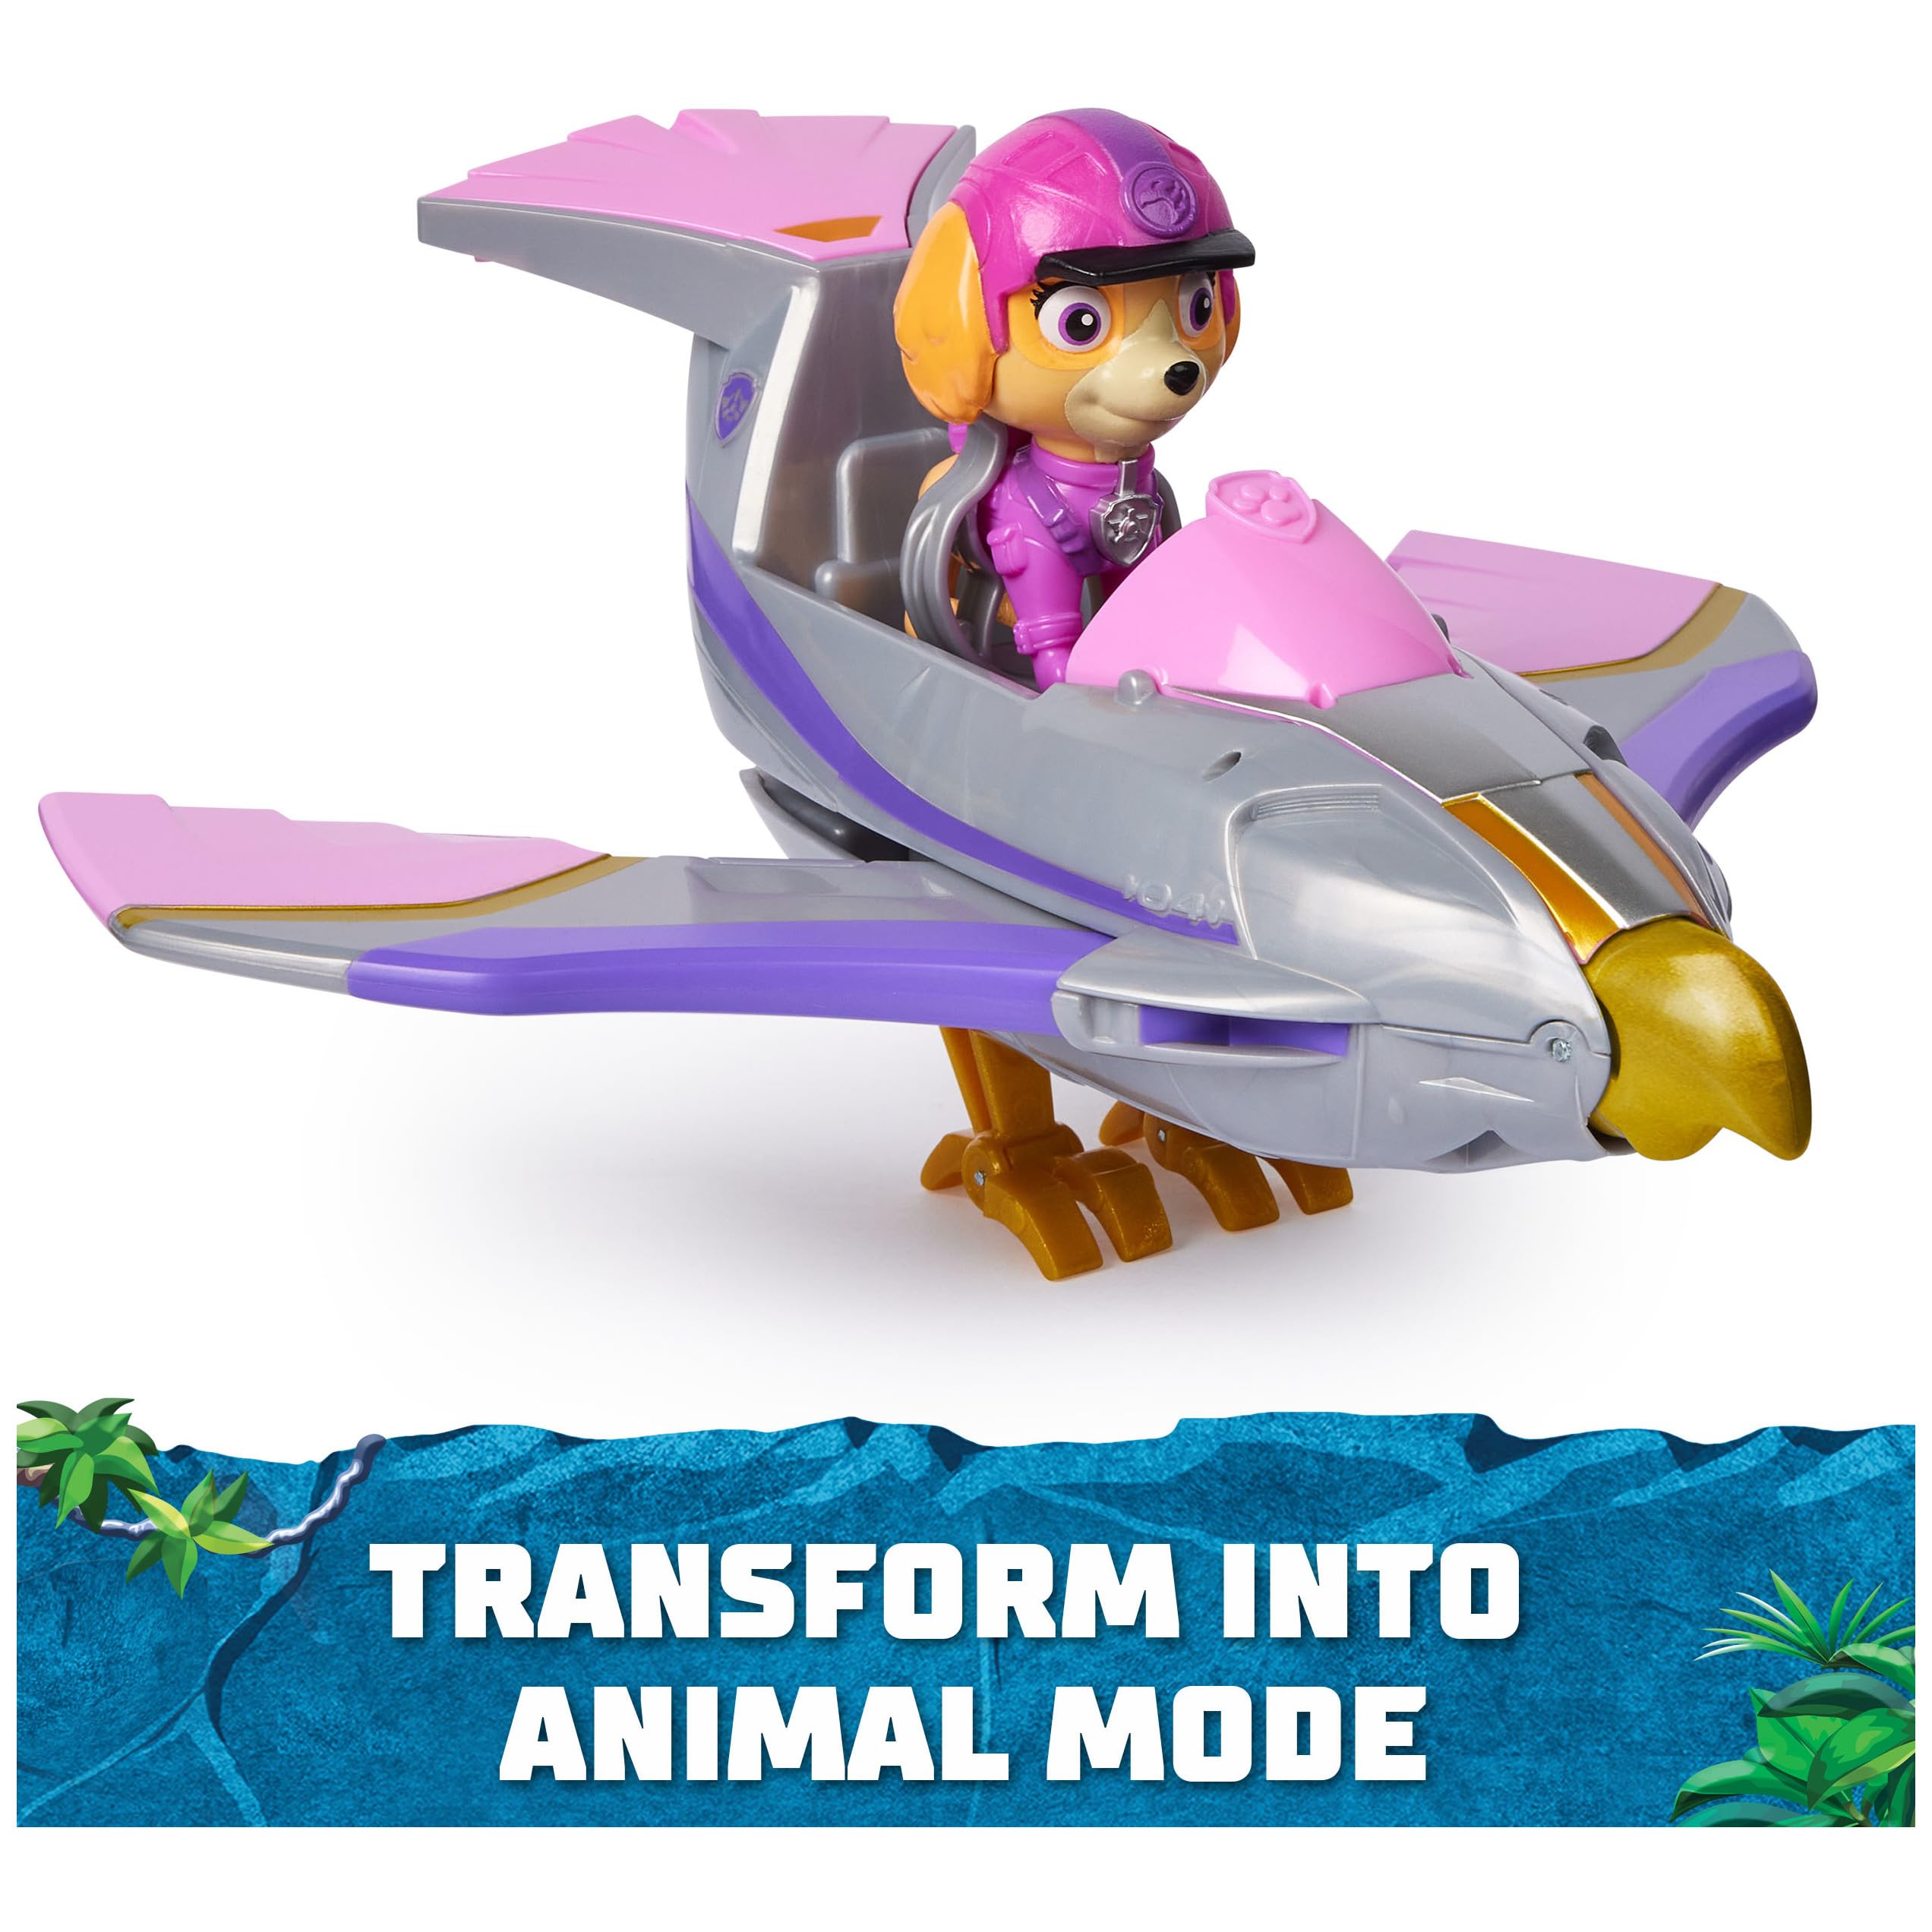 Paw Patrol Jungle Pups, Skye Falcon Vehicle, Toy Jet with Collectible Action Figure, Kids Toys for Boys & Girls Ages 3 and Up